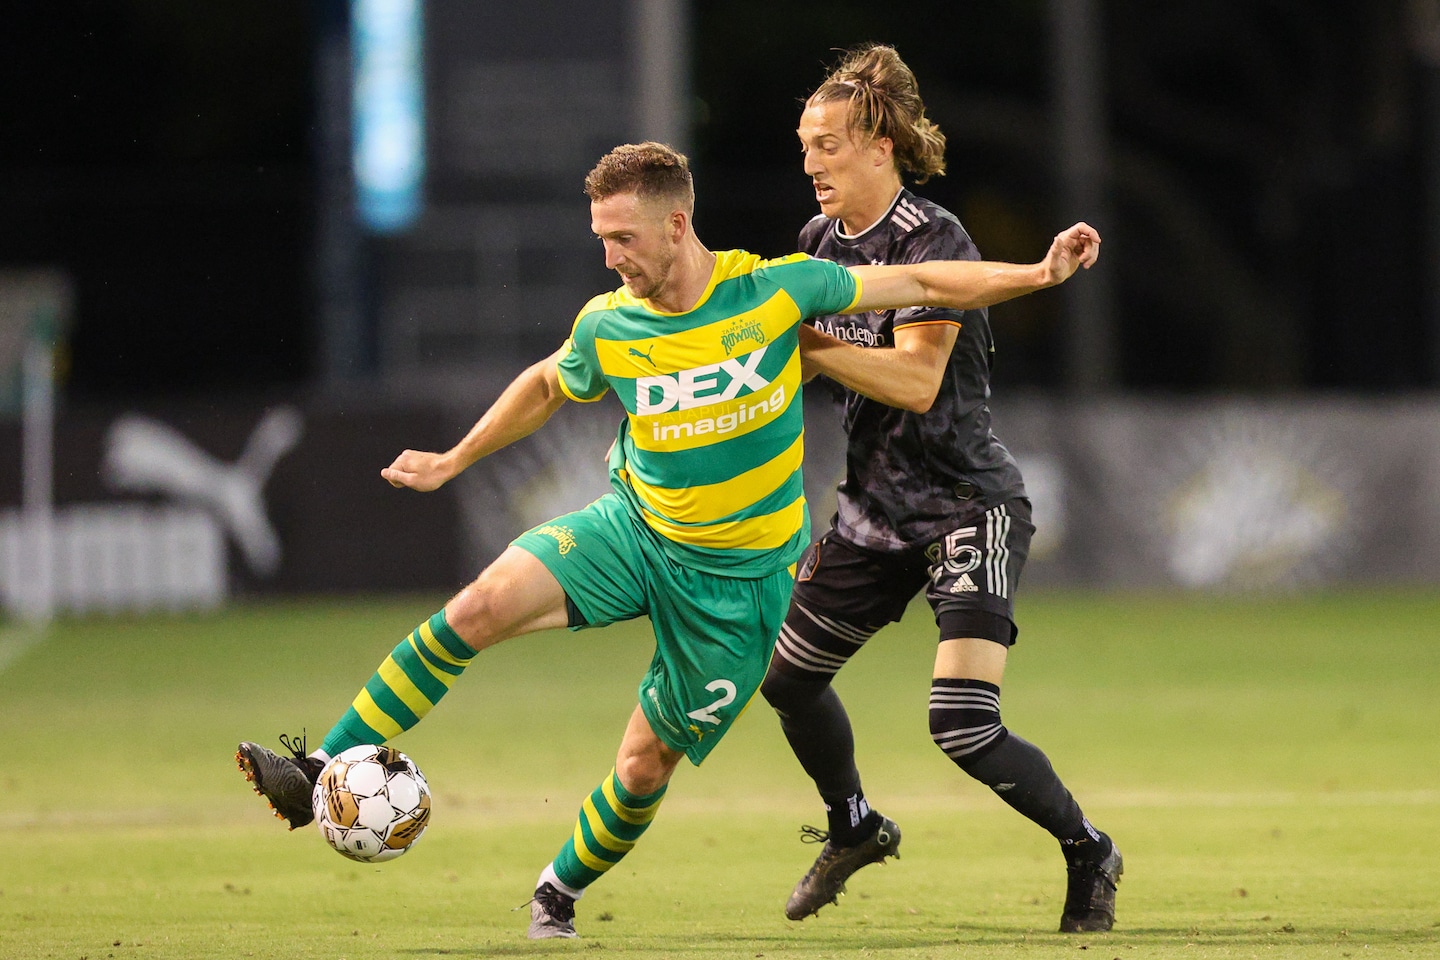 D.C. United acquires defender Conner Antley from second-tier Tampa Bay